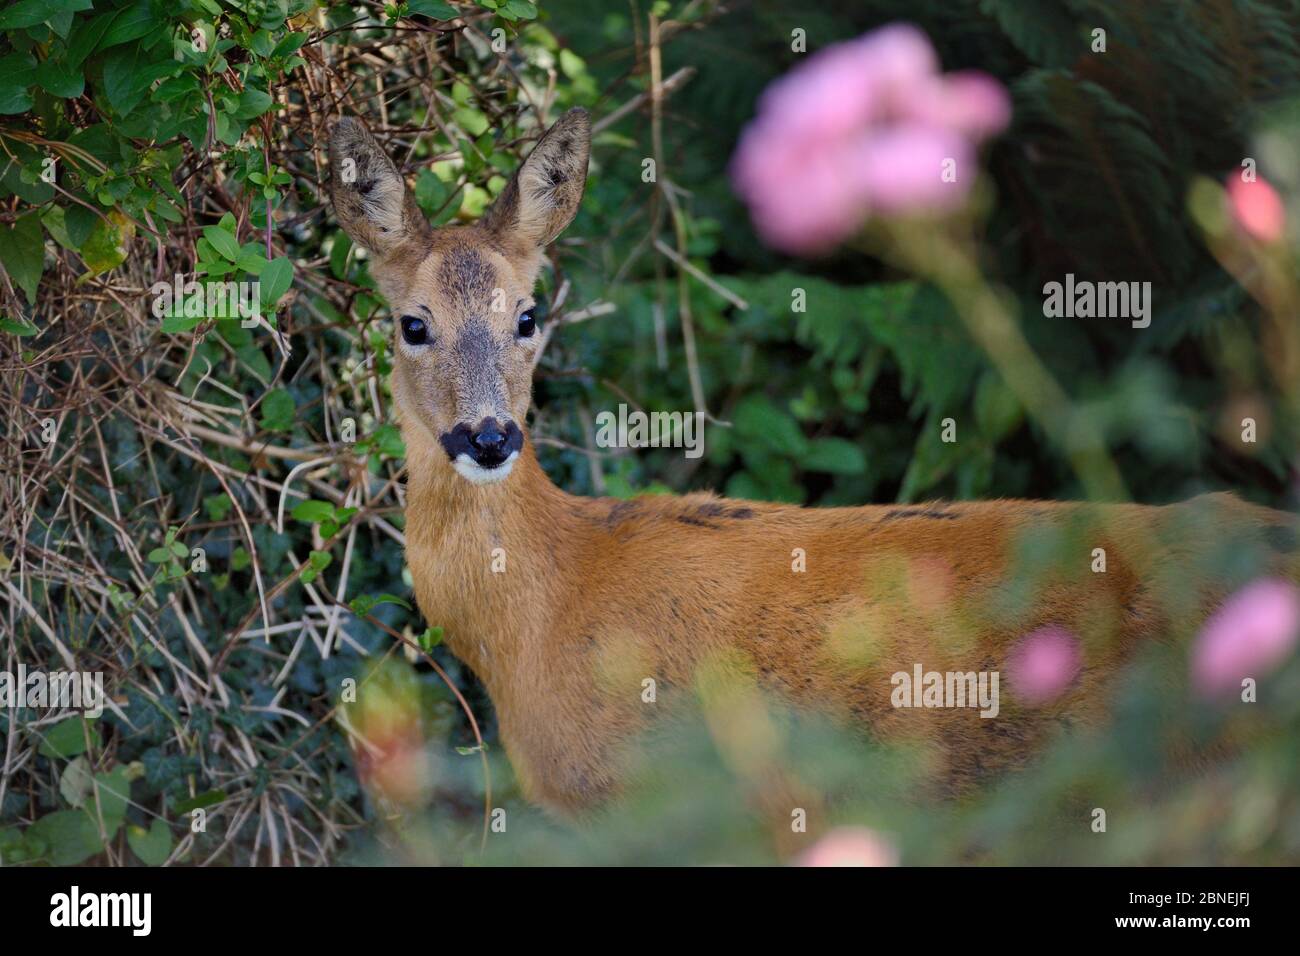 Roe deer (Capreolus capreolus) doe visiting a garden in morning sunlight, close to Rose bushes. Wiltshire, UK, October. Stock Photo